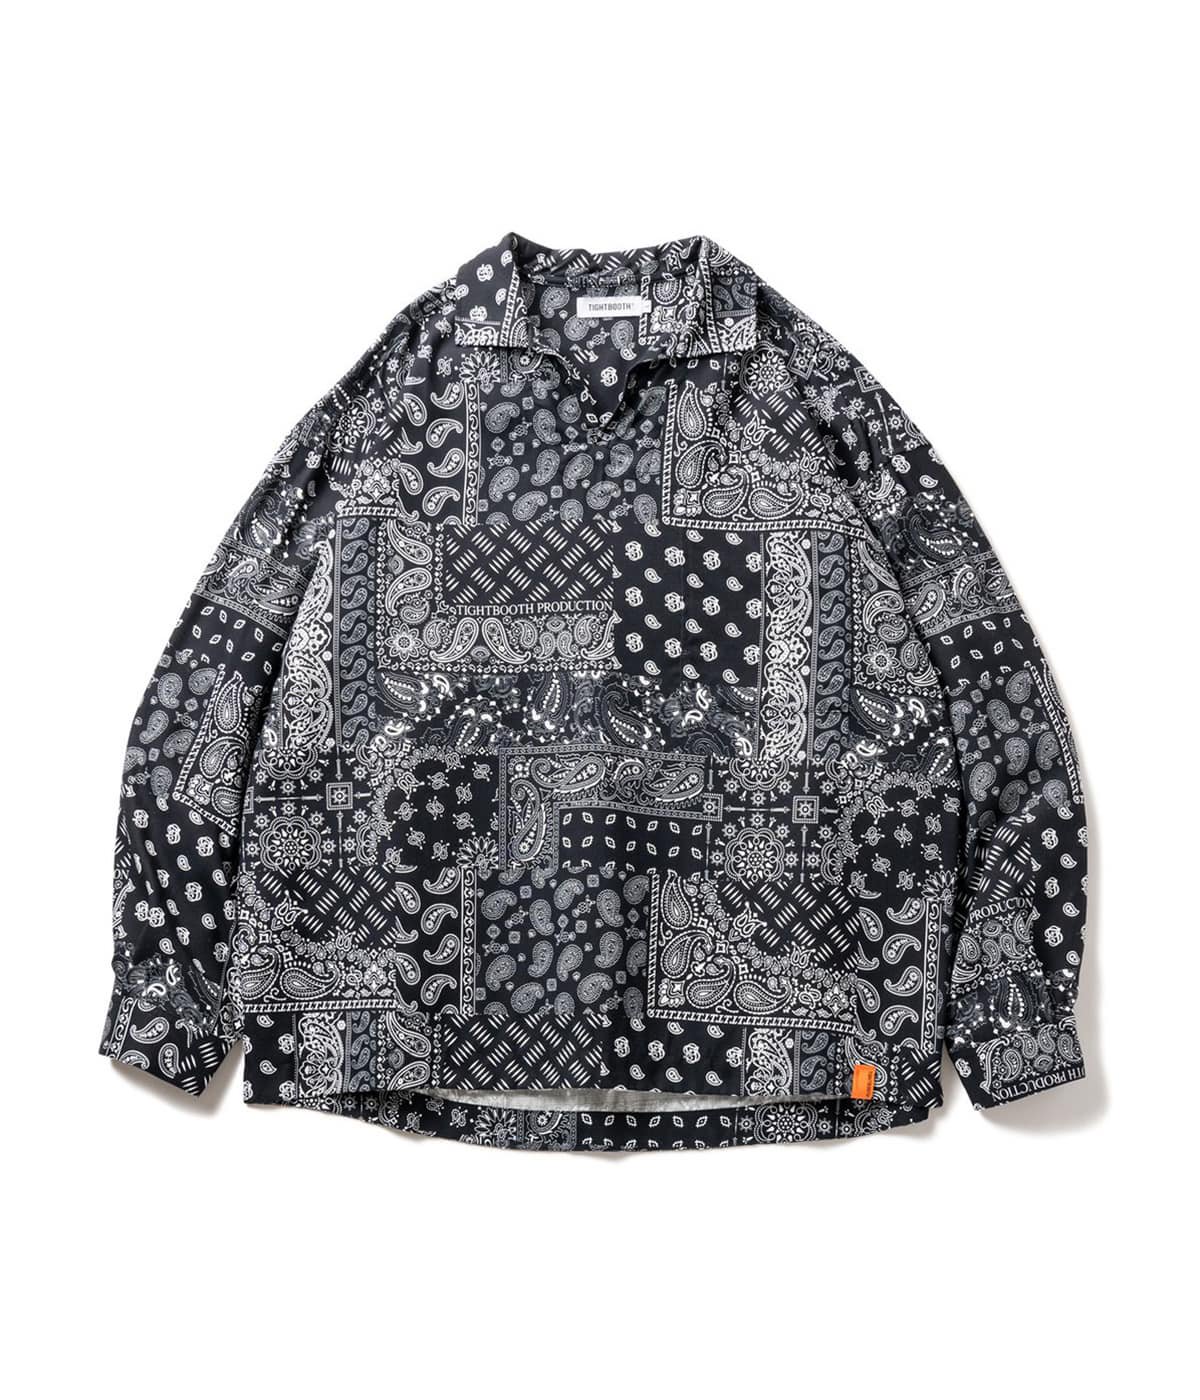 TBPR / PAISLEY L/S OPEN SHIRT | TIGHTBOOTH(タイトブース